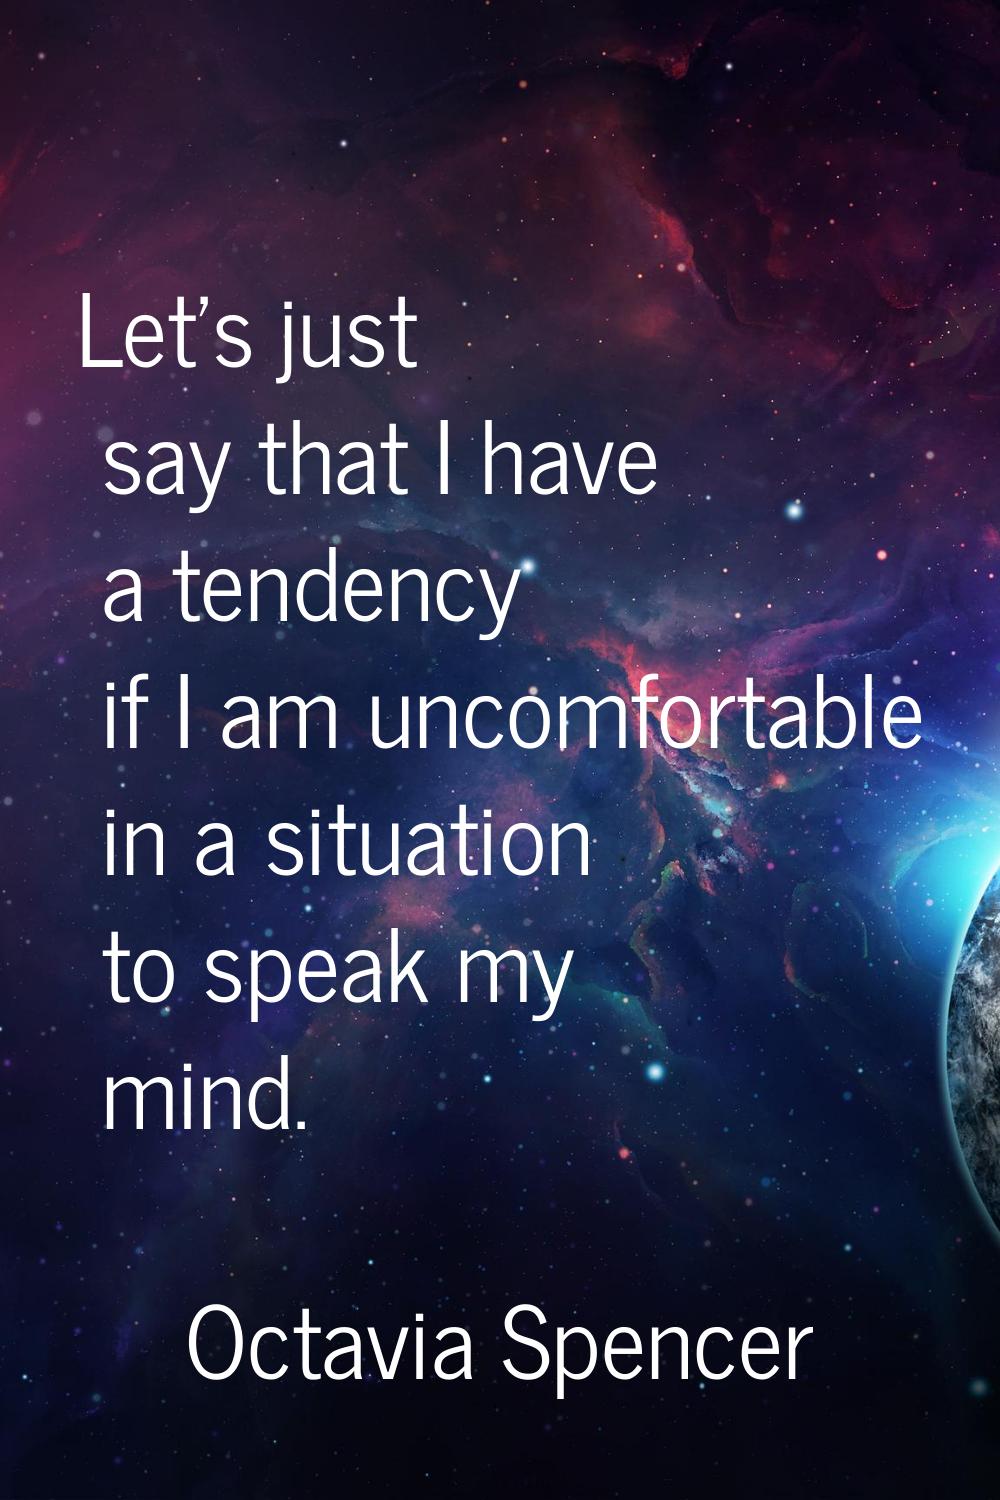 Let's just say that I have a tendency if I am uncomfortable in a situation to speak my mind.